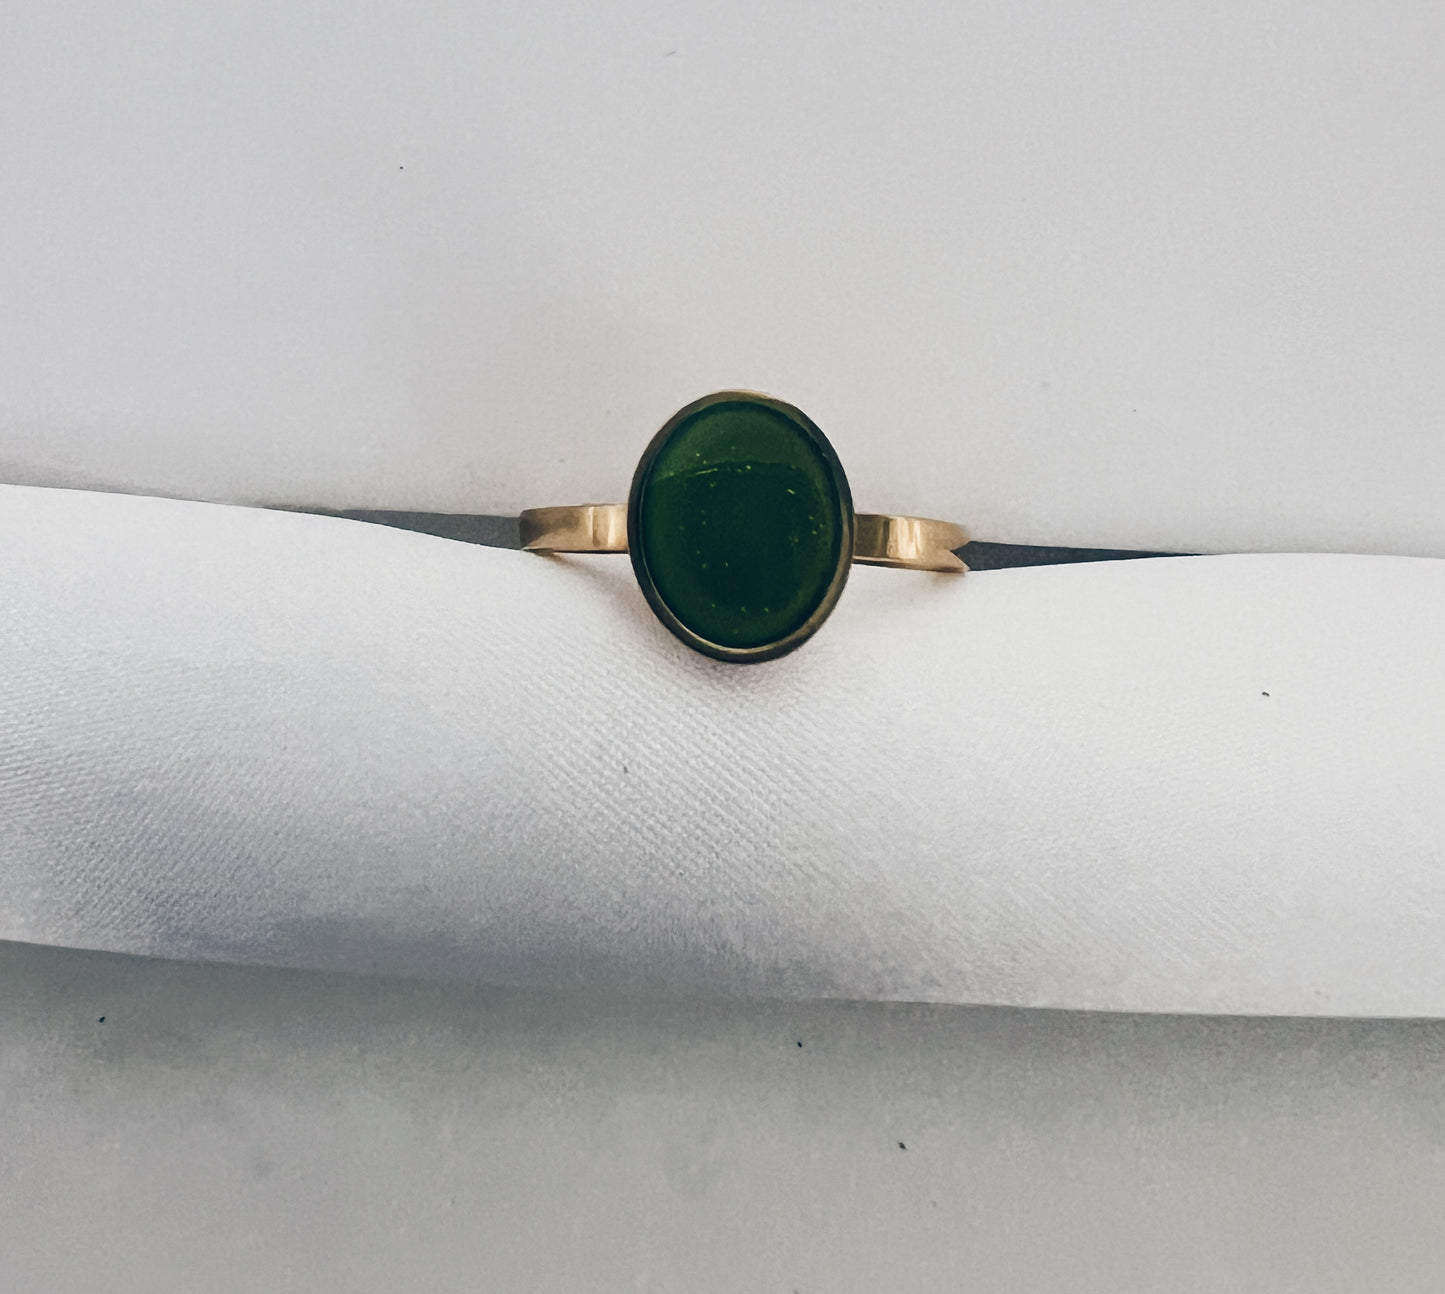 Mood Ring + More Options